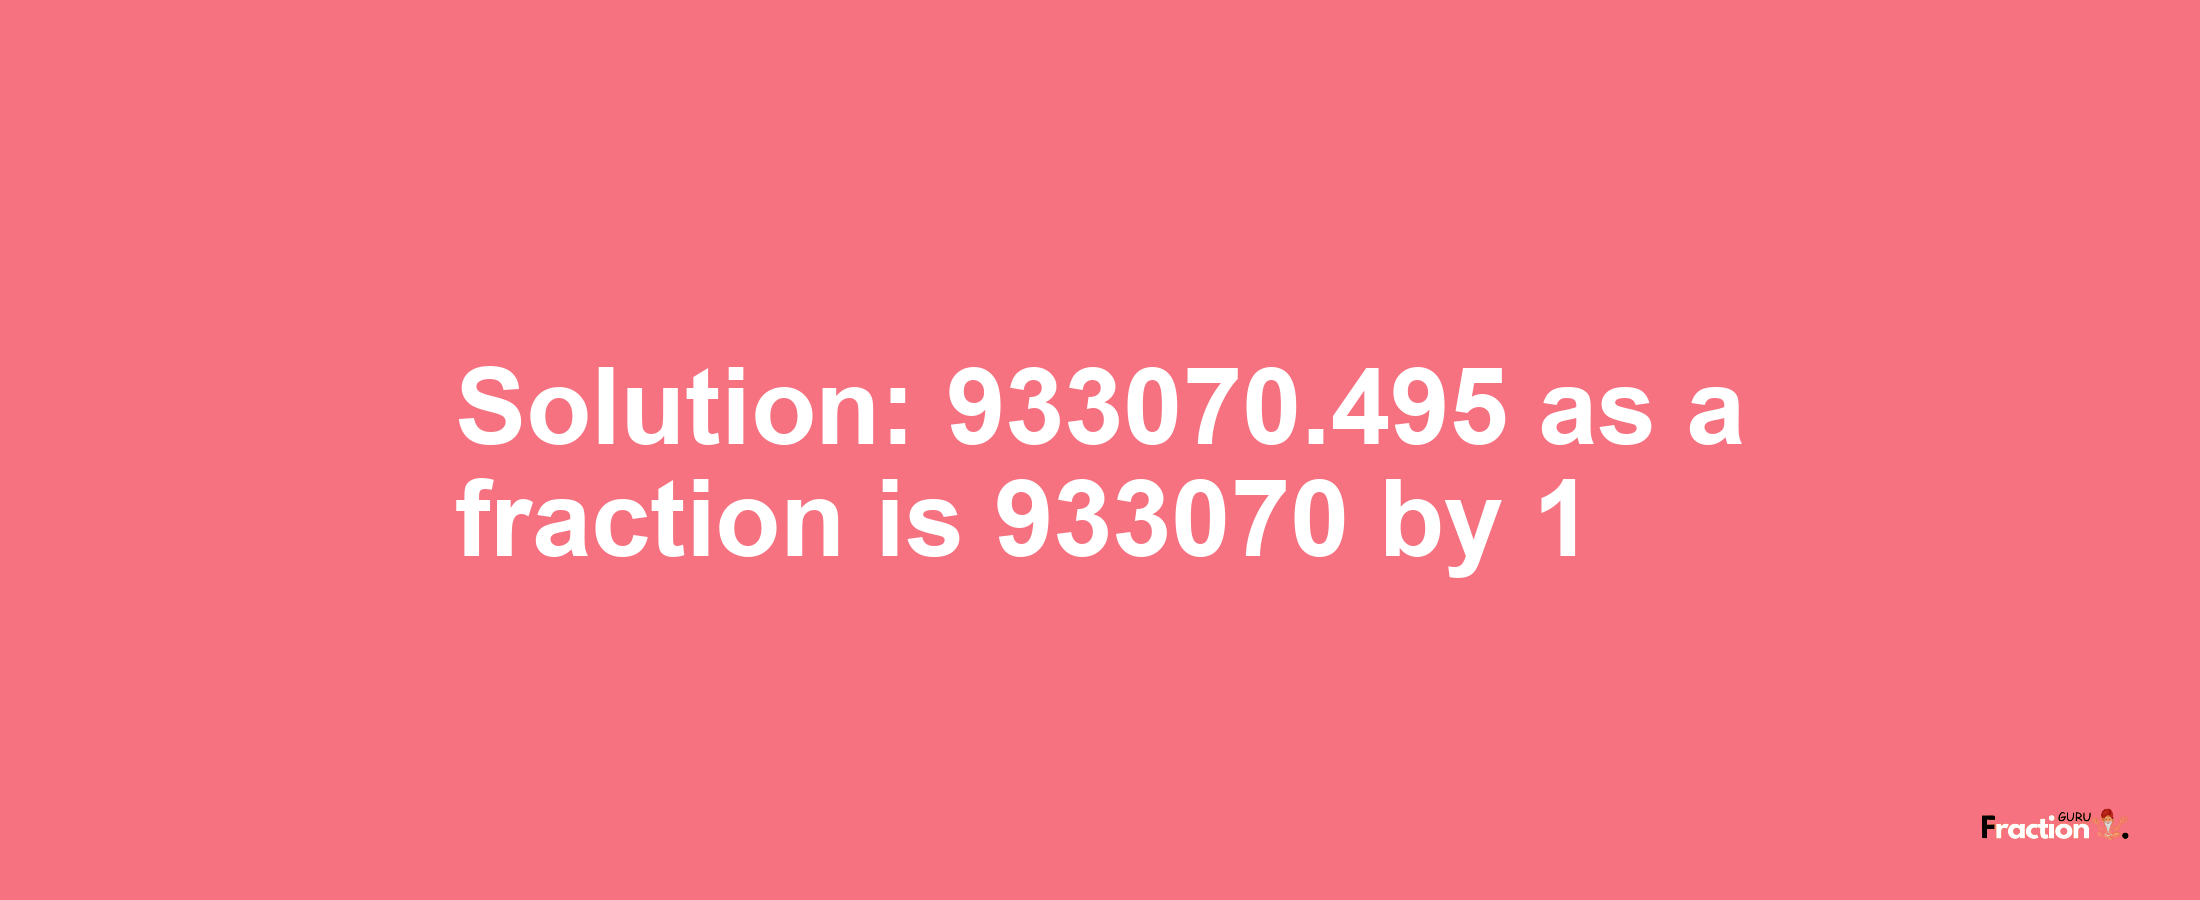 Solution:933070.495 as a fraction is 933070/1